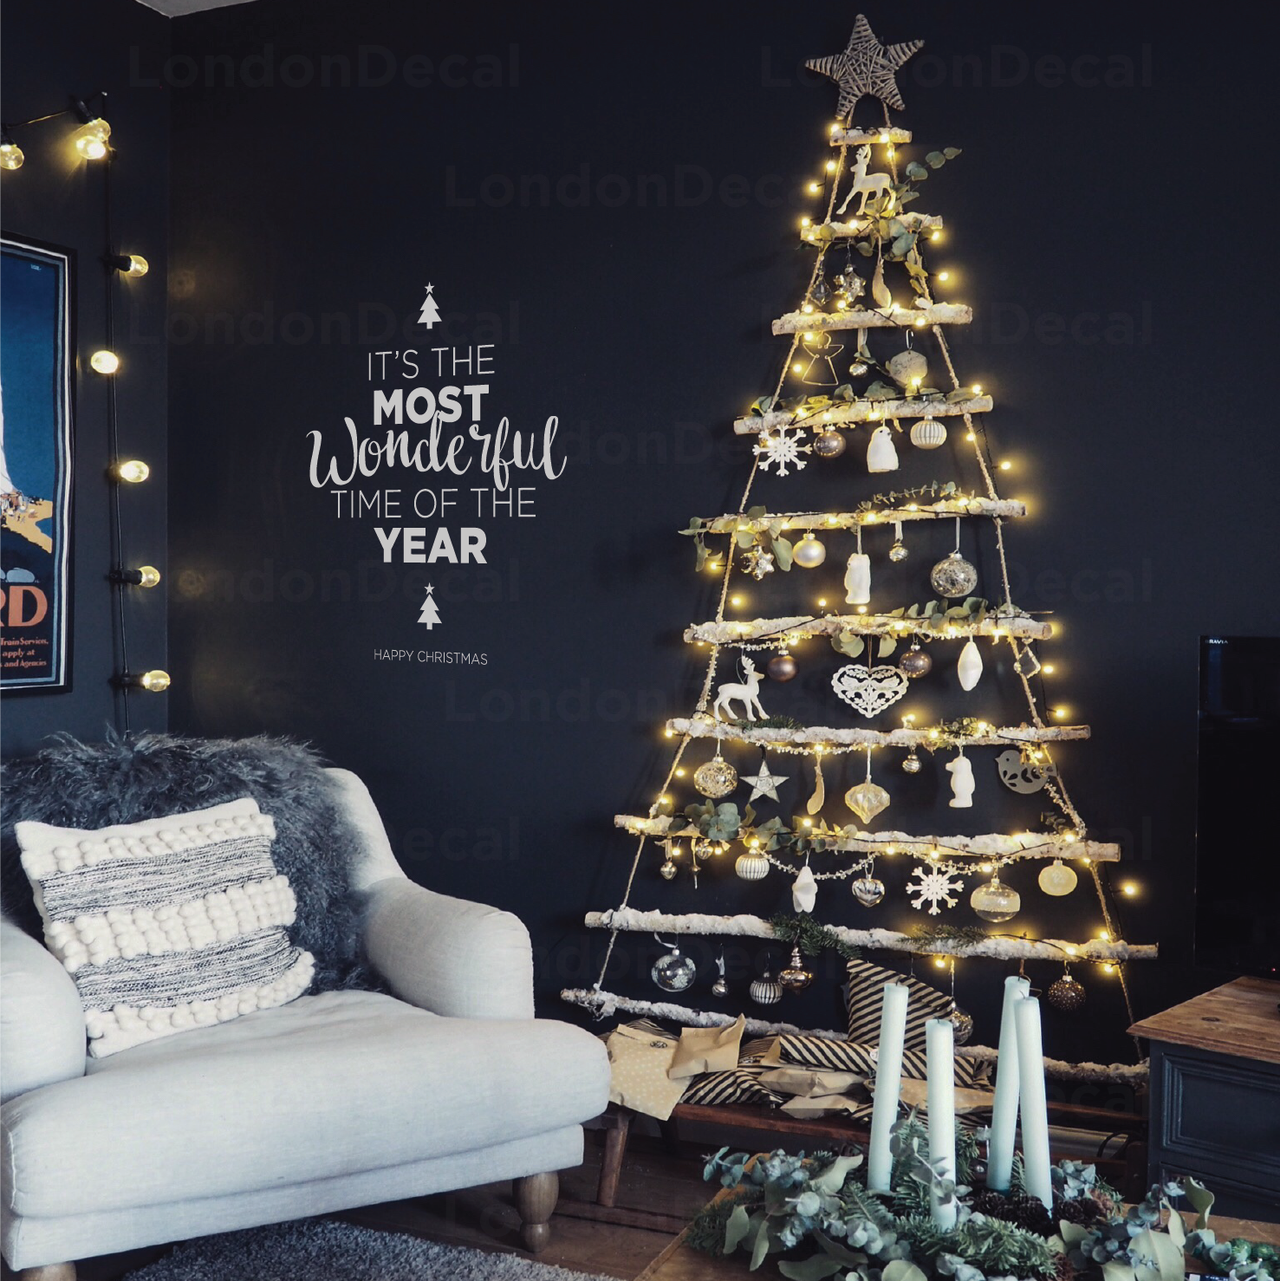 Most Wonderful Time of the Year - Christmas Wall Decal